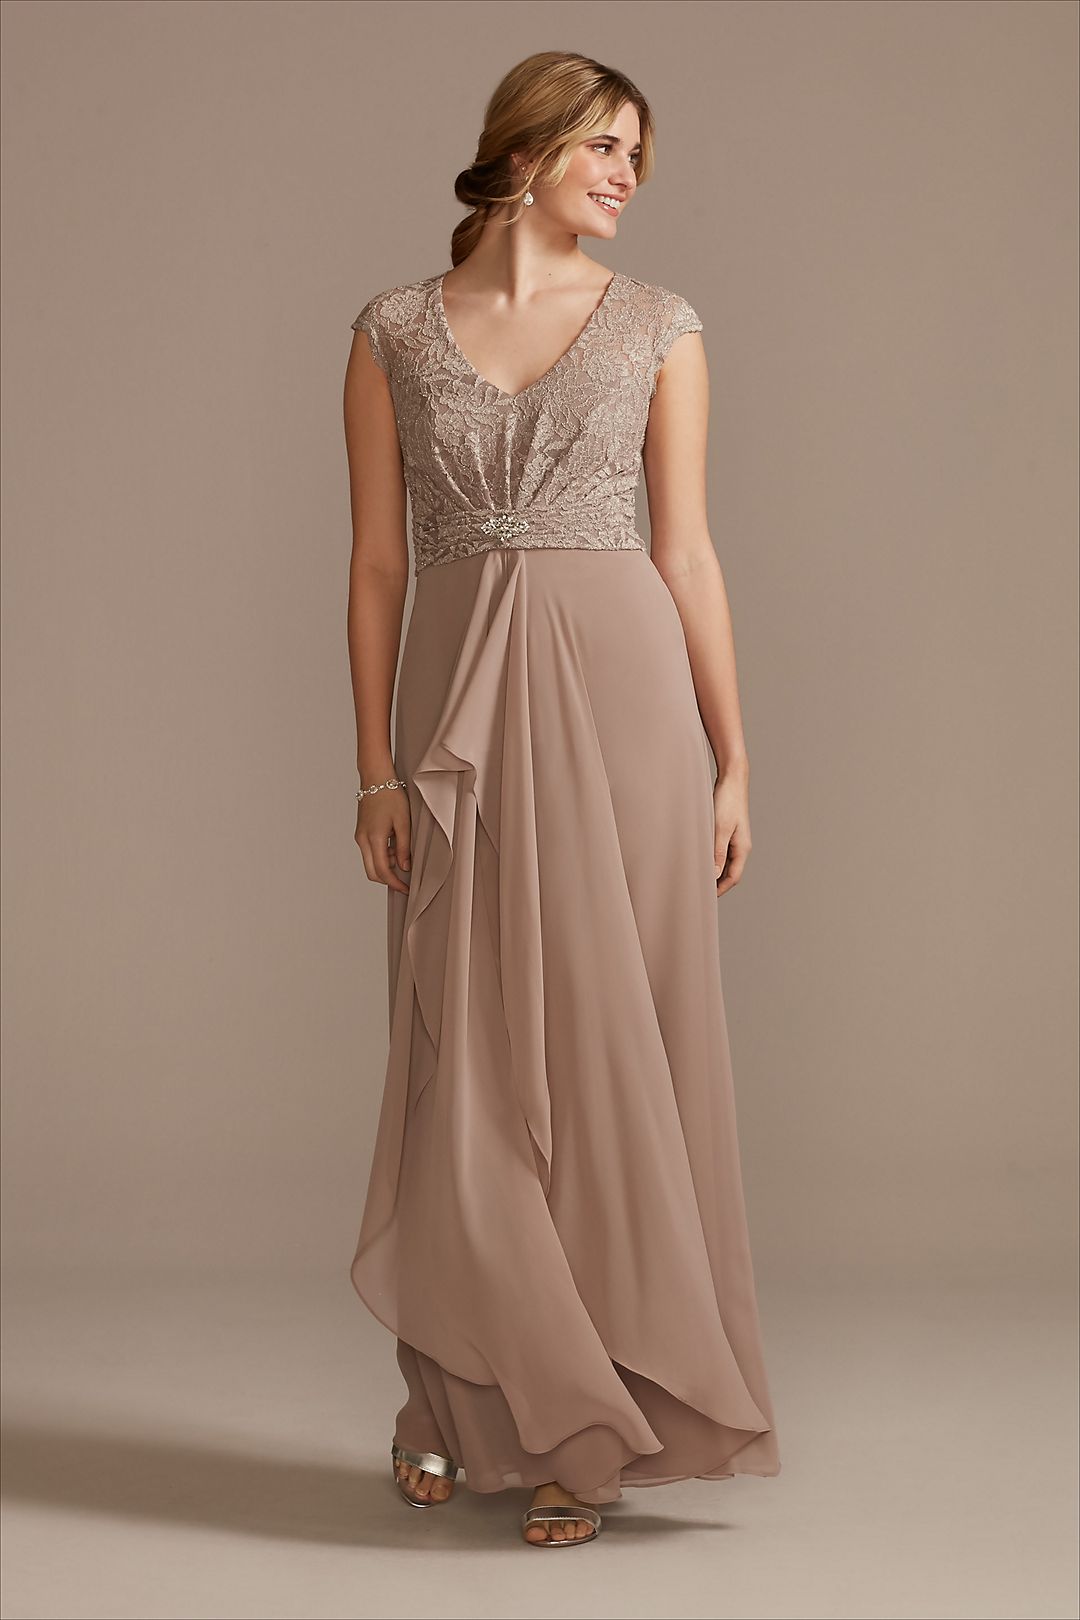 Chiffon A-Line Dress with Lace Cap Sleeve Overlay Image 1